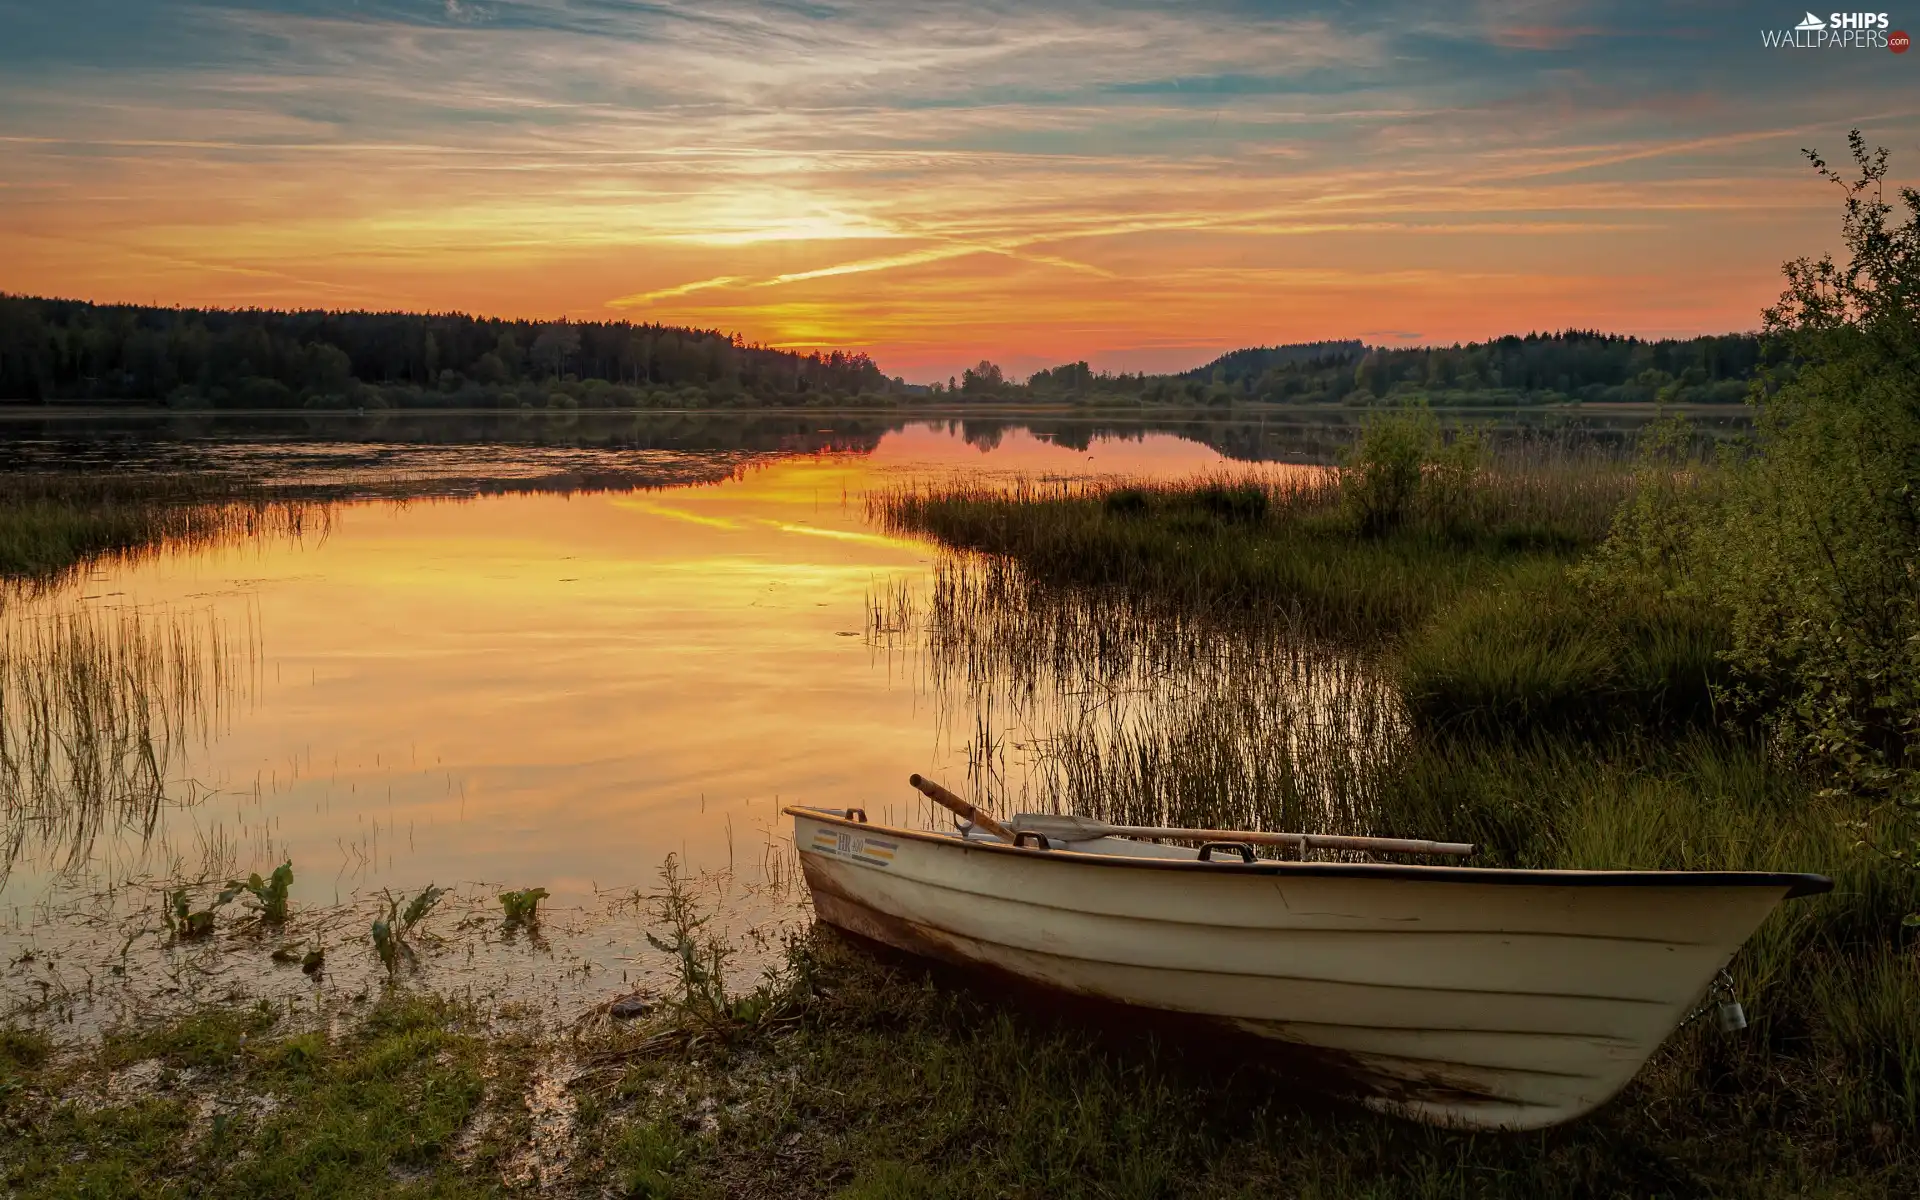 trees, Boat, grass, forest, lake, viewes, Great Sunsets